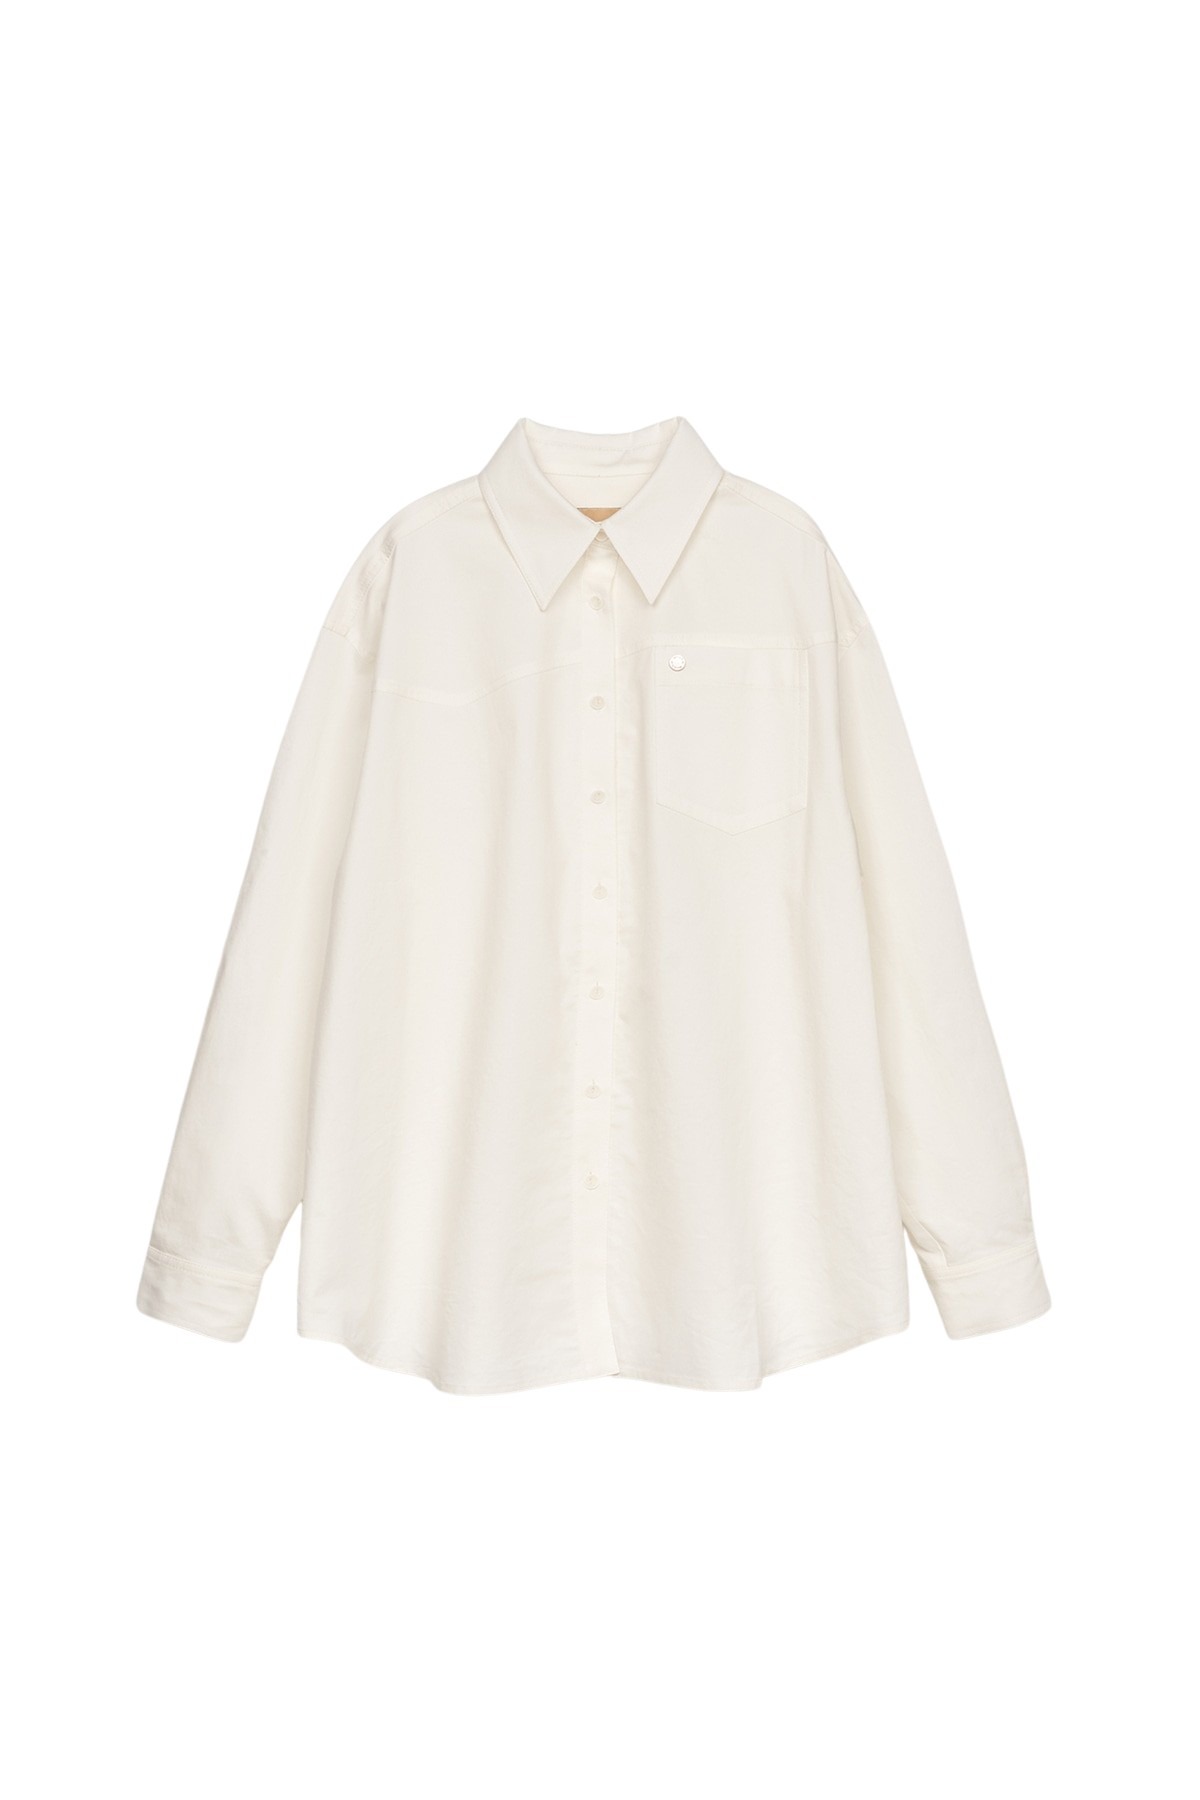 WESTERN DETAIL SHIRT IN IVORY